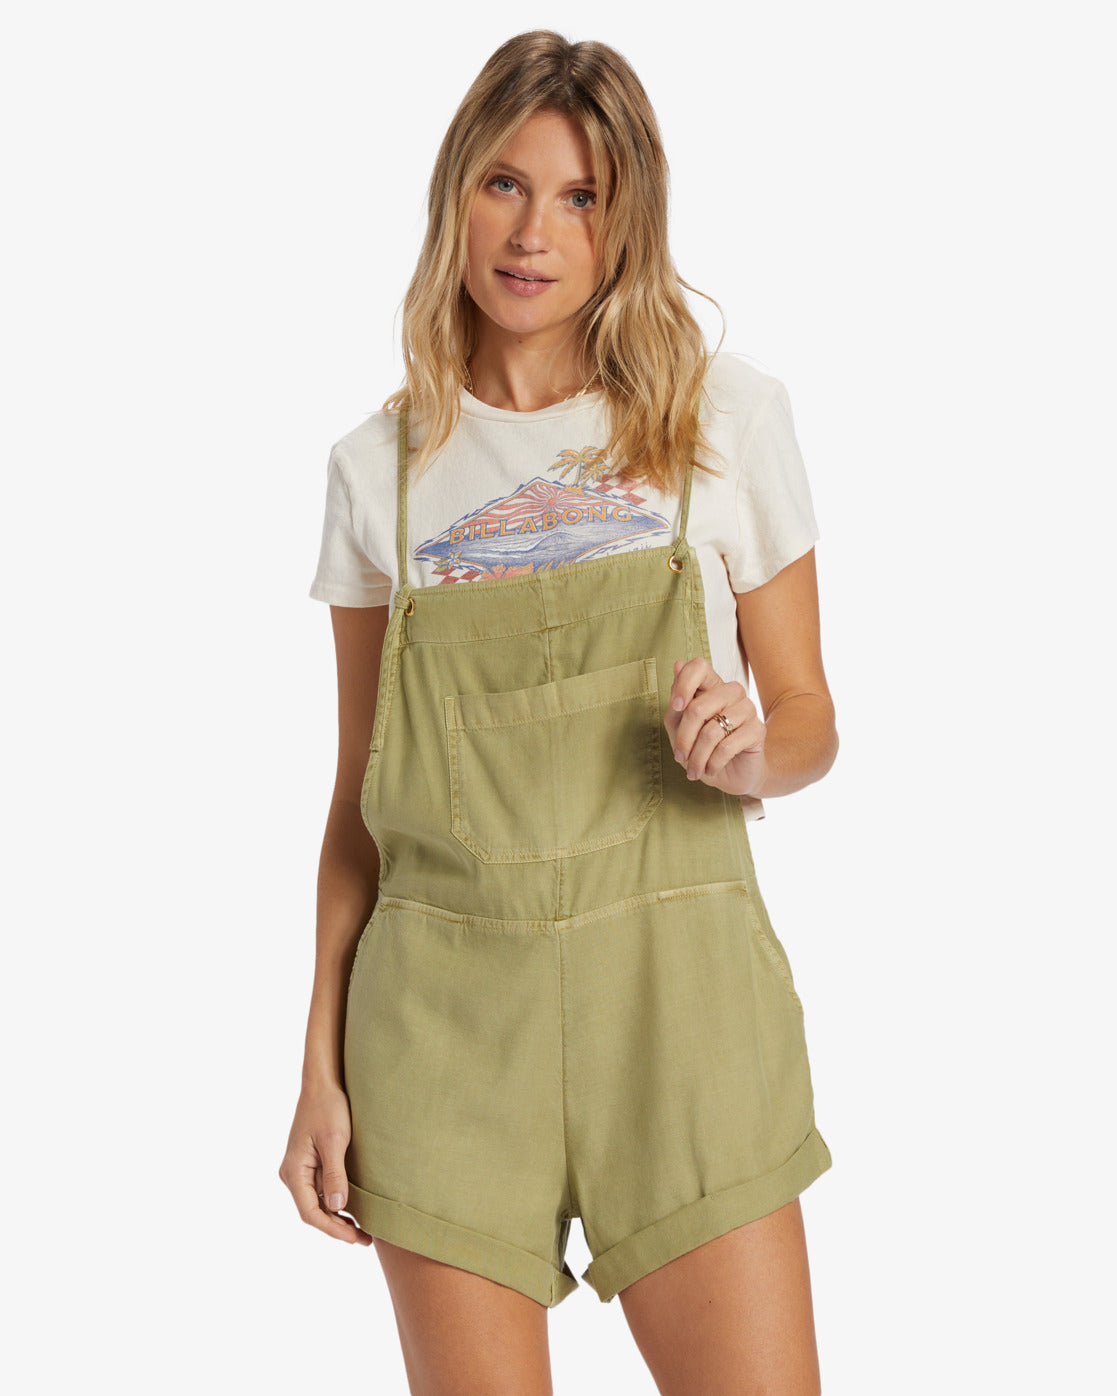 Front view of model wearing an avocado green color shorts romper by Billabong